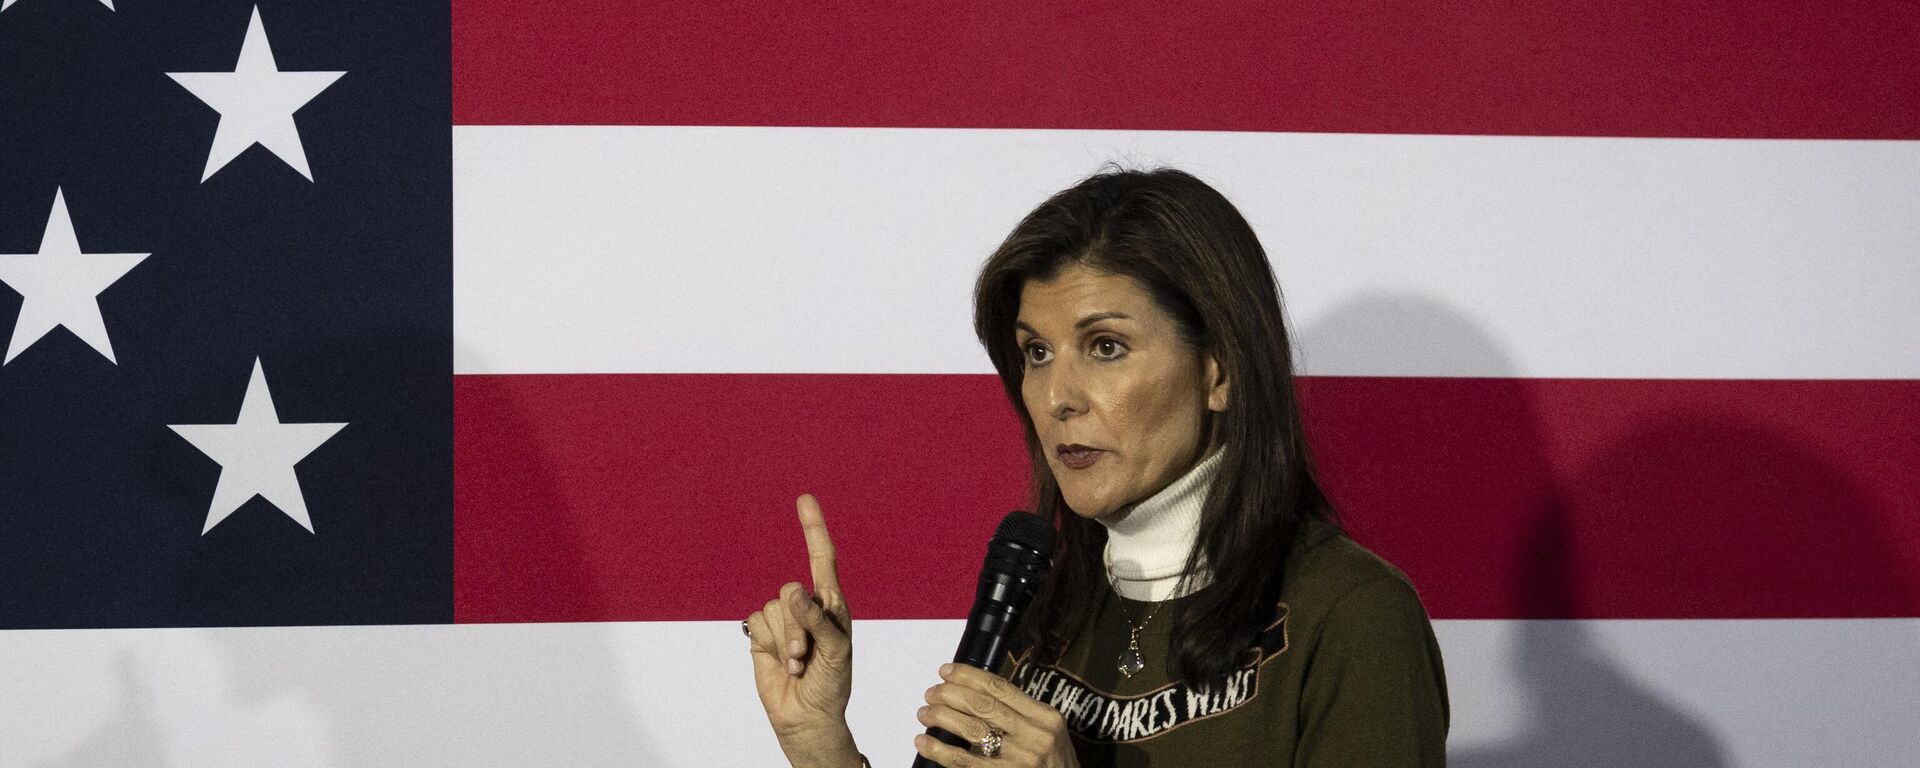 Former UN Ambassador and 2024 presidential hopeful Nikki Haley speaks at a campaign event in The James Theater in Iowa City, Iowa, on January 13, 2024. - Sputnik International, 1920, 15.01.2024